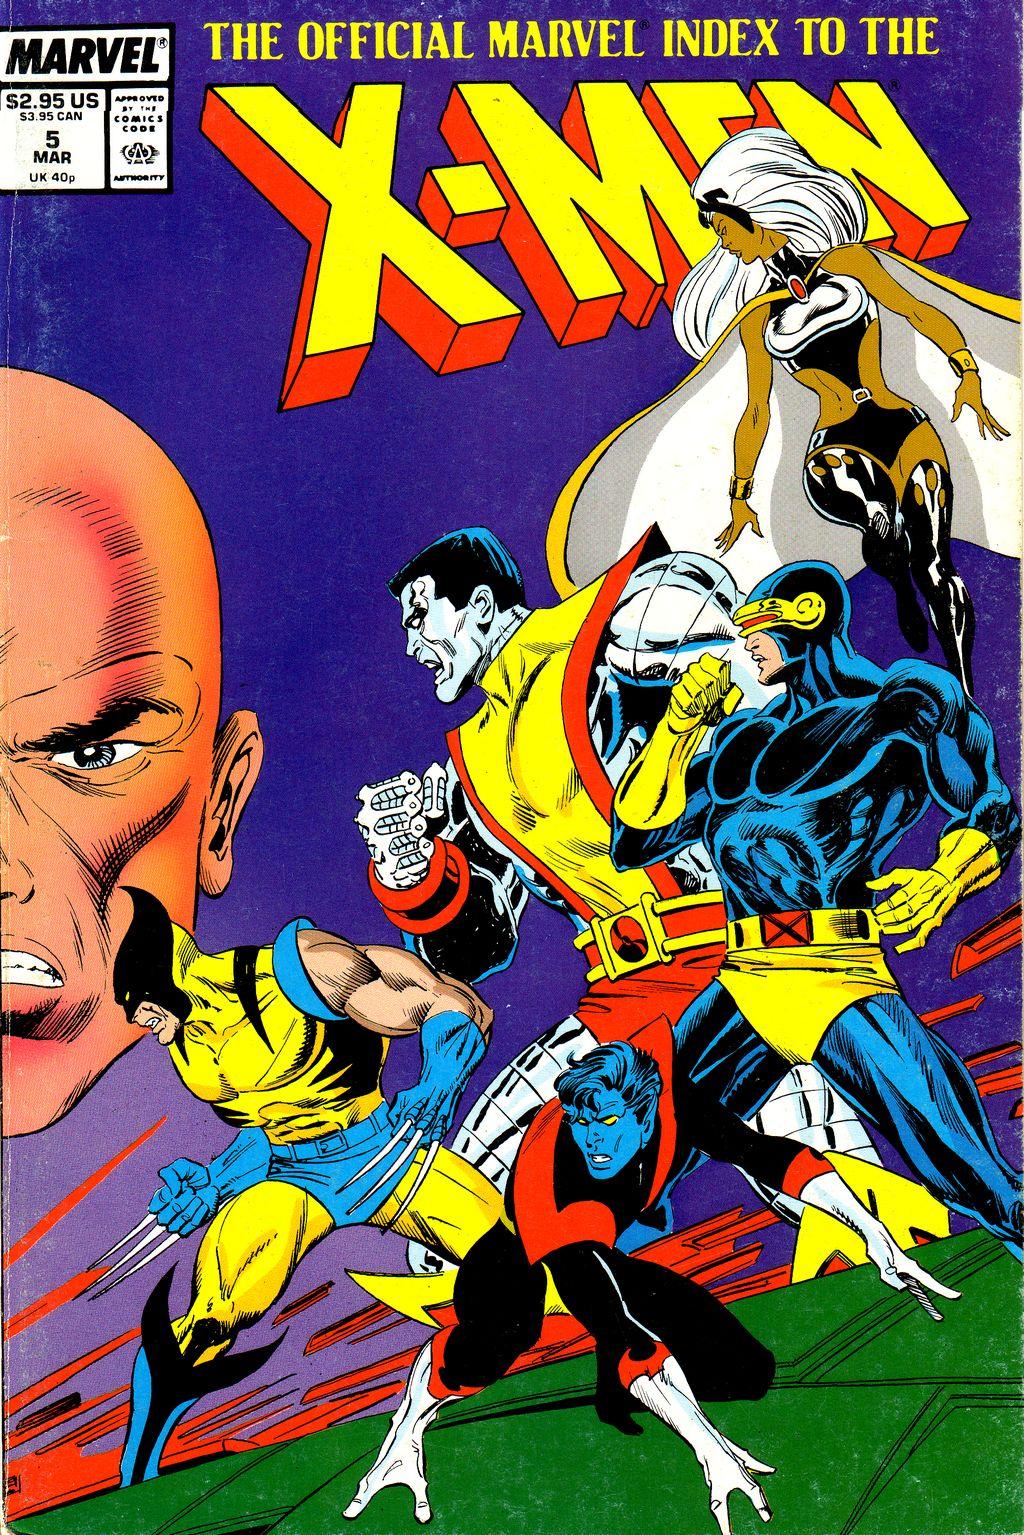 The Official Marvel Index to the X-Men Vol. 1 #5